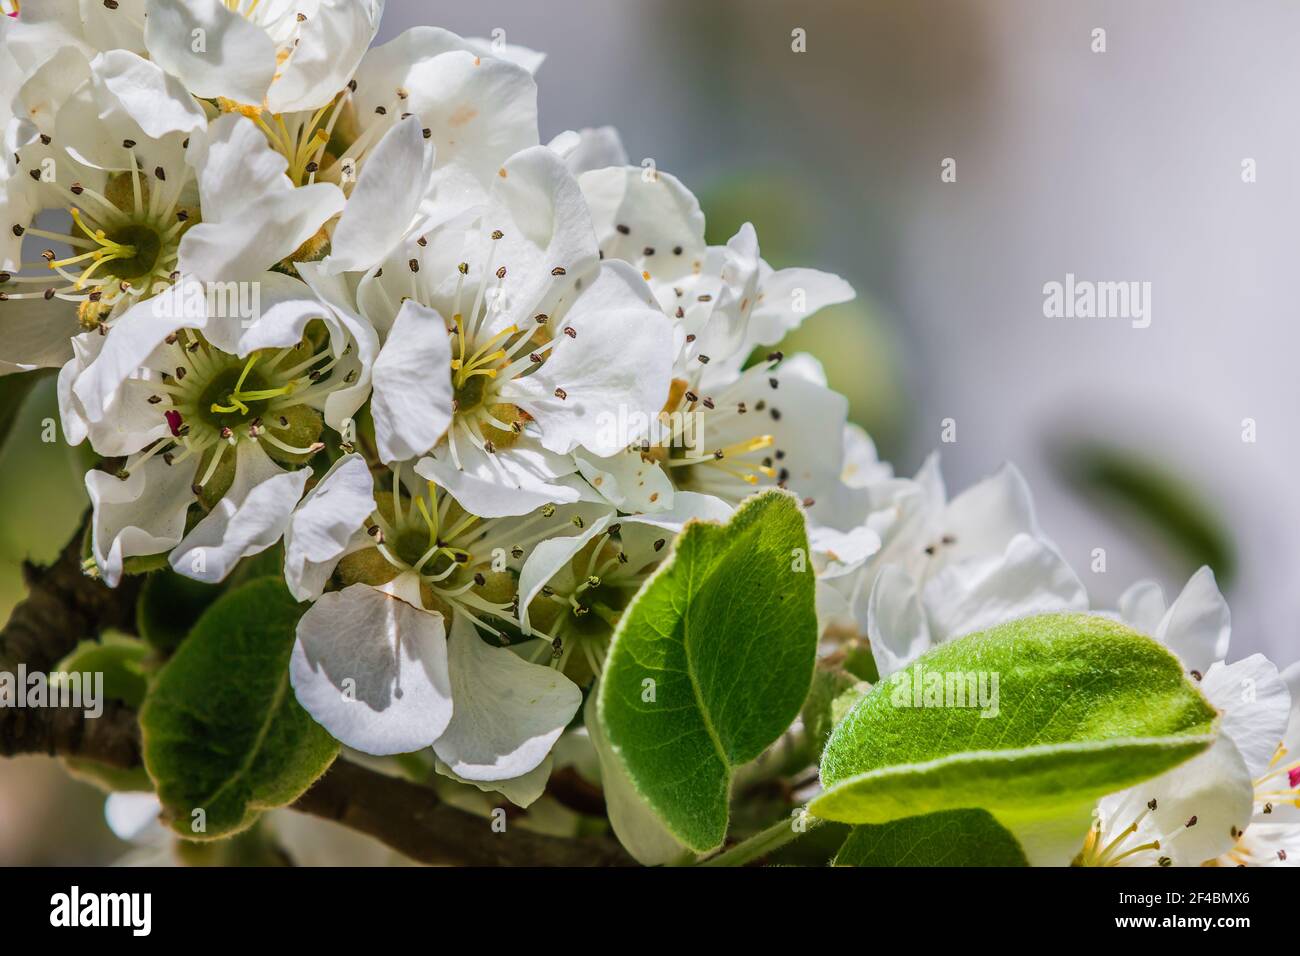 Details of apple blossoms from a fruit tree. White blossoms from the apple tree in spring sunshine. Open flower with petals, flower stalks, reddish pi Stock Photo